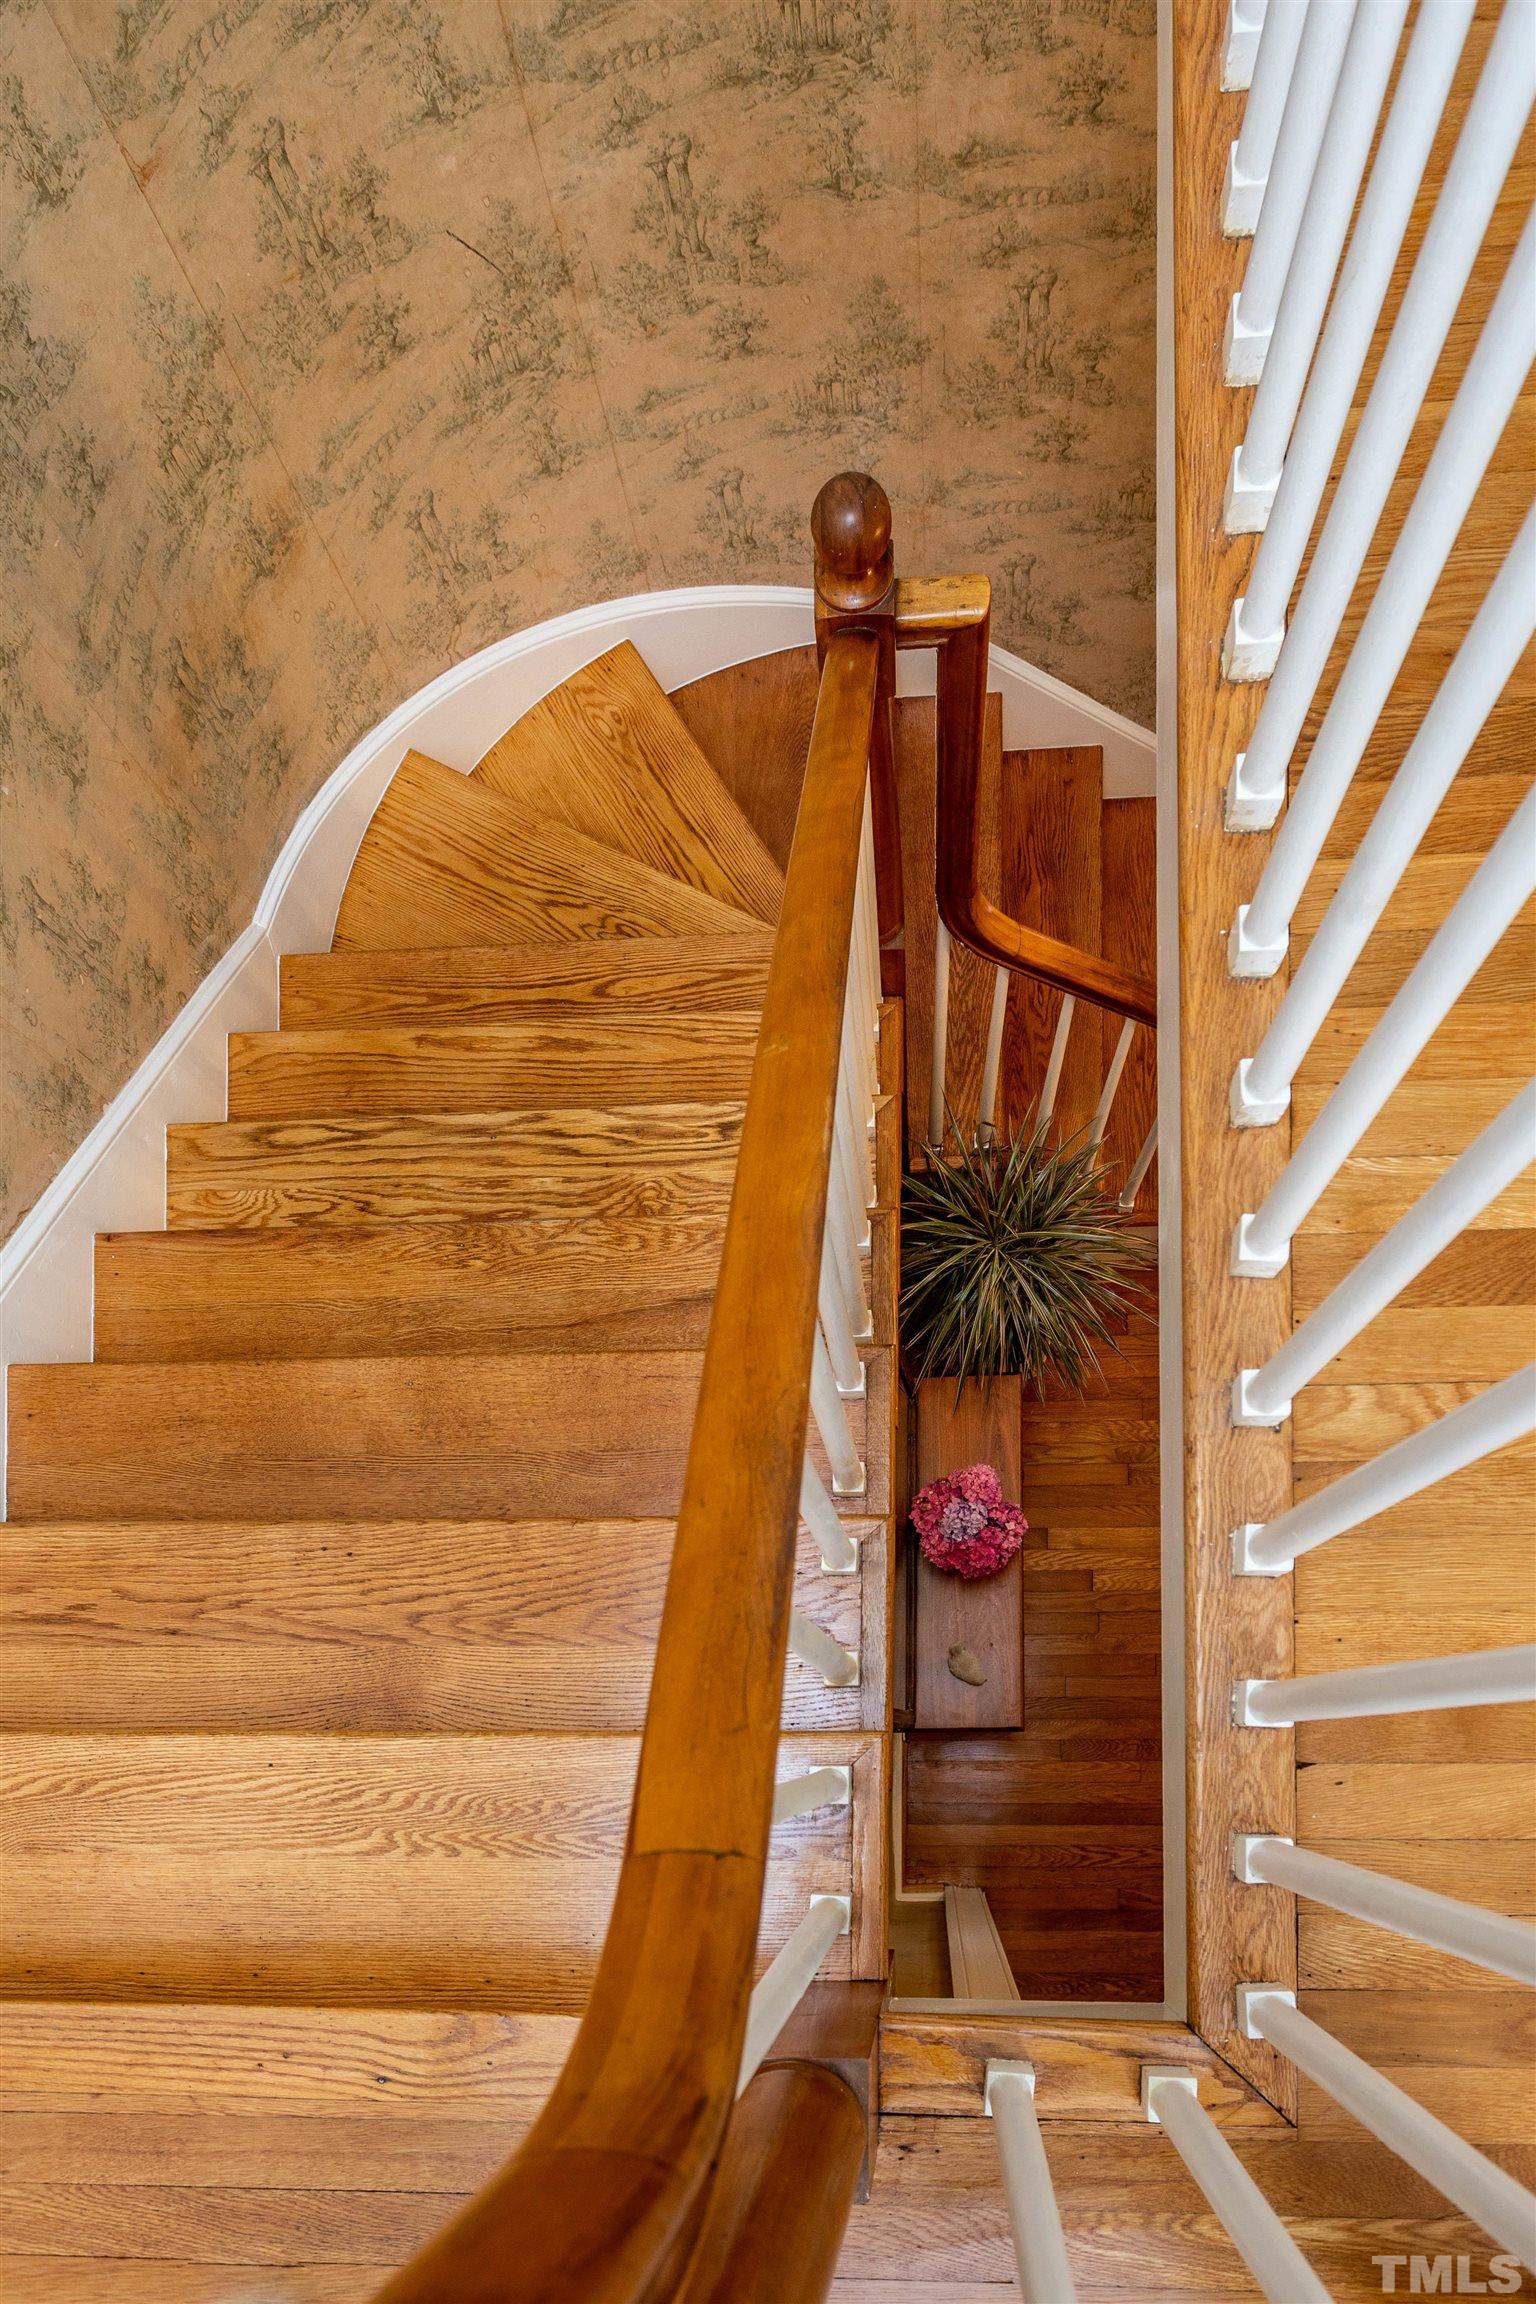 The centerpiece of this home - the staircase